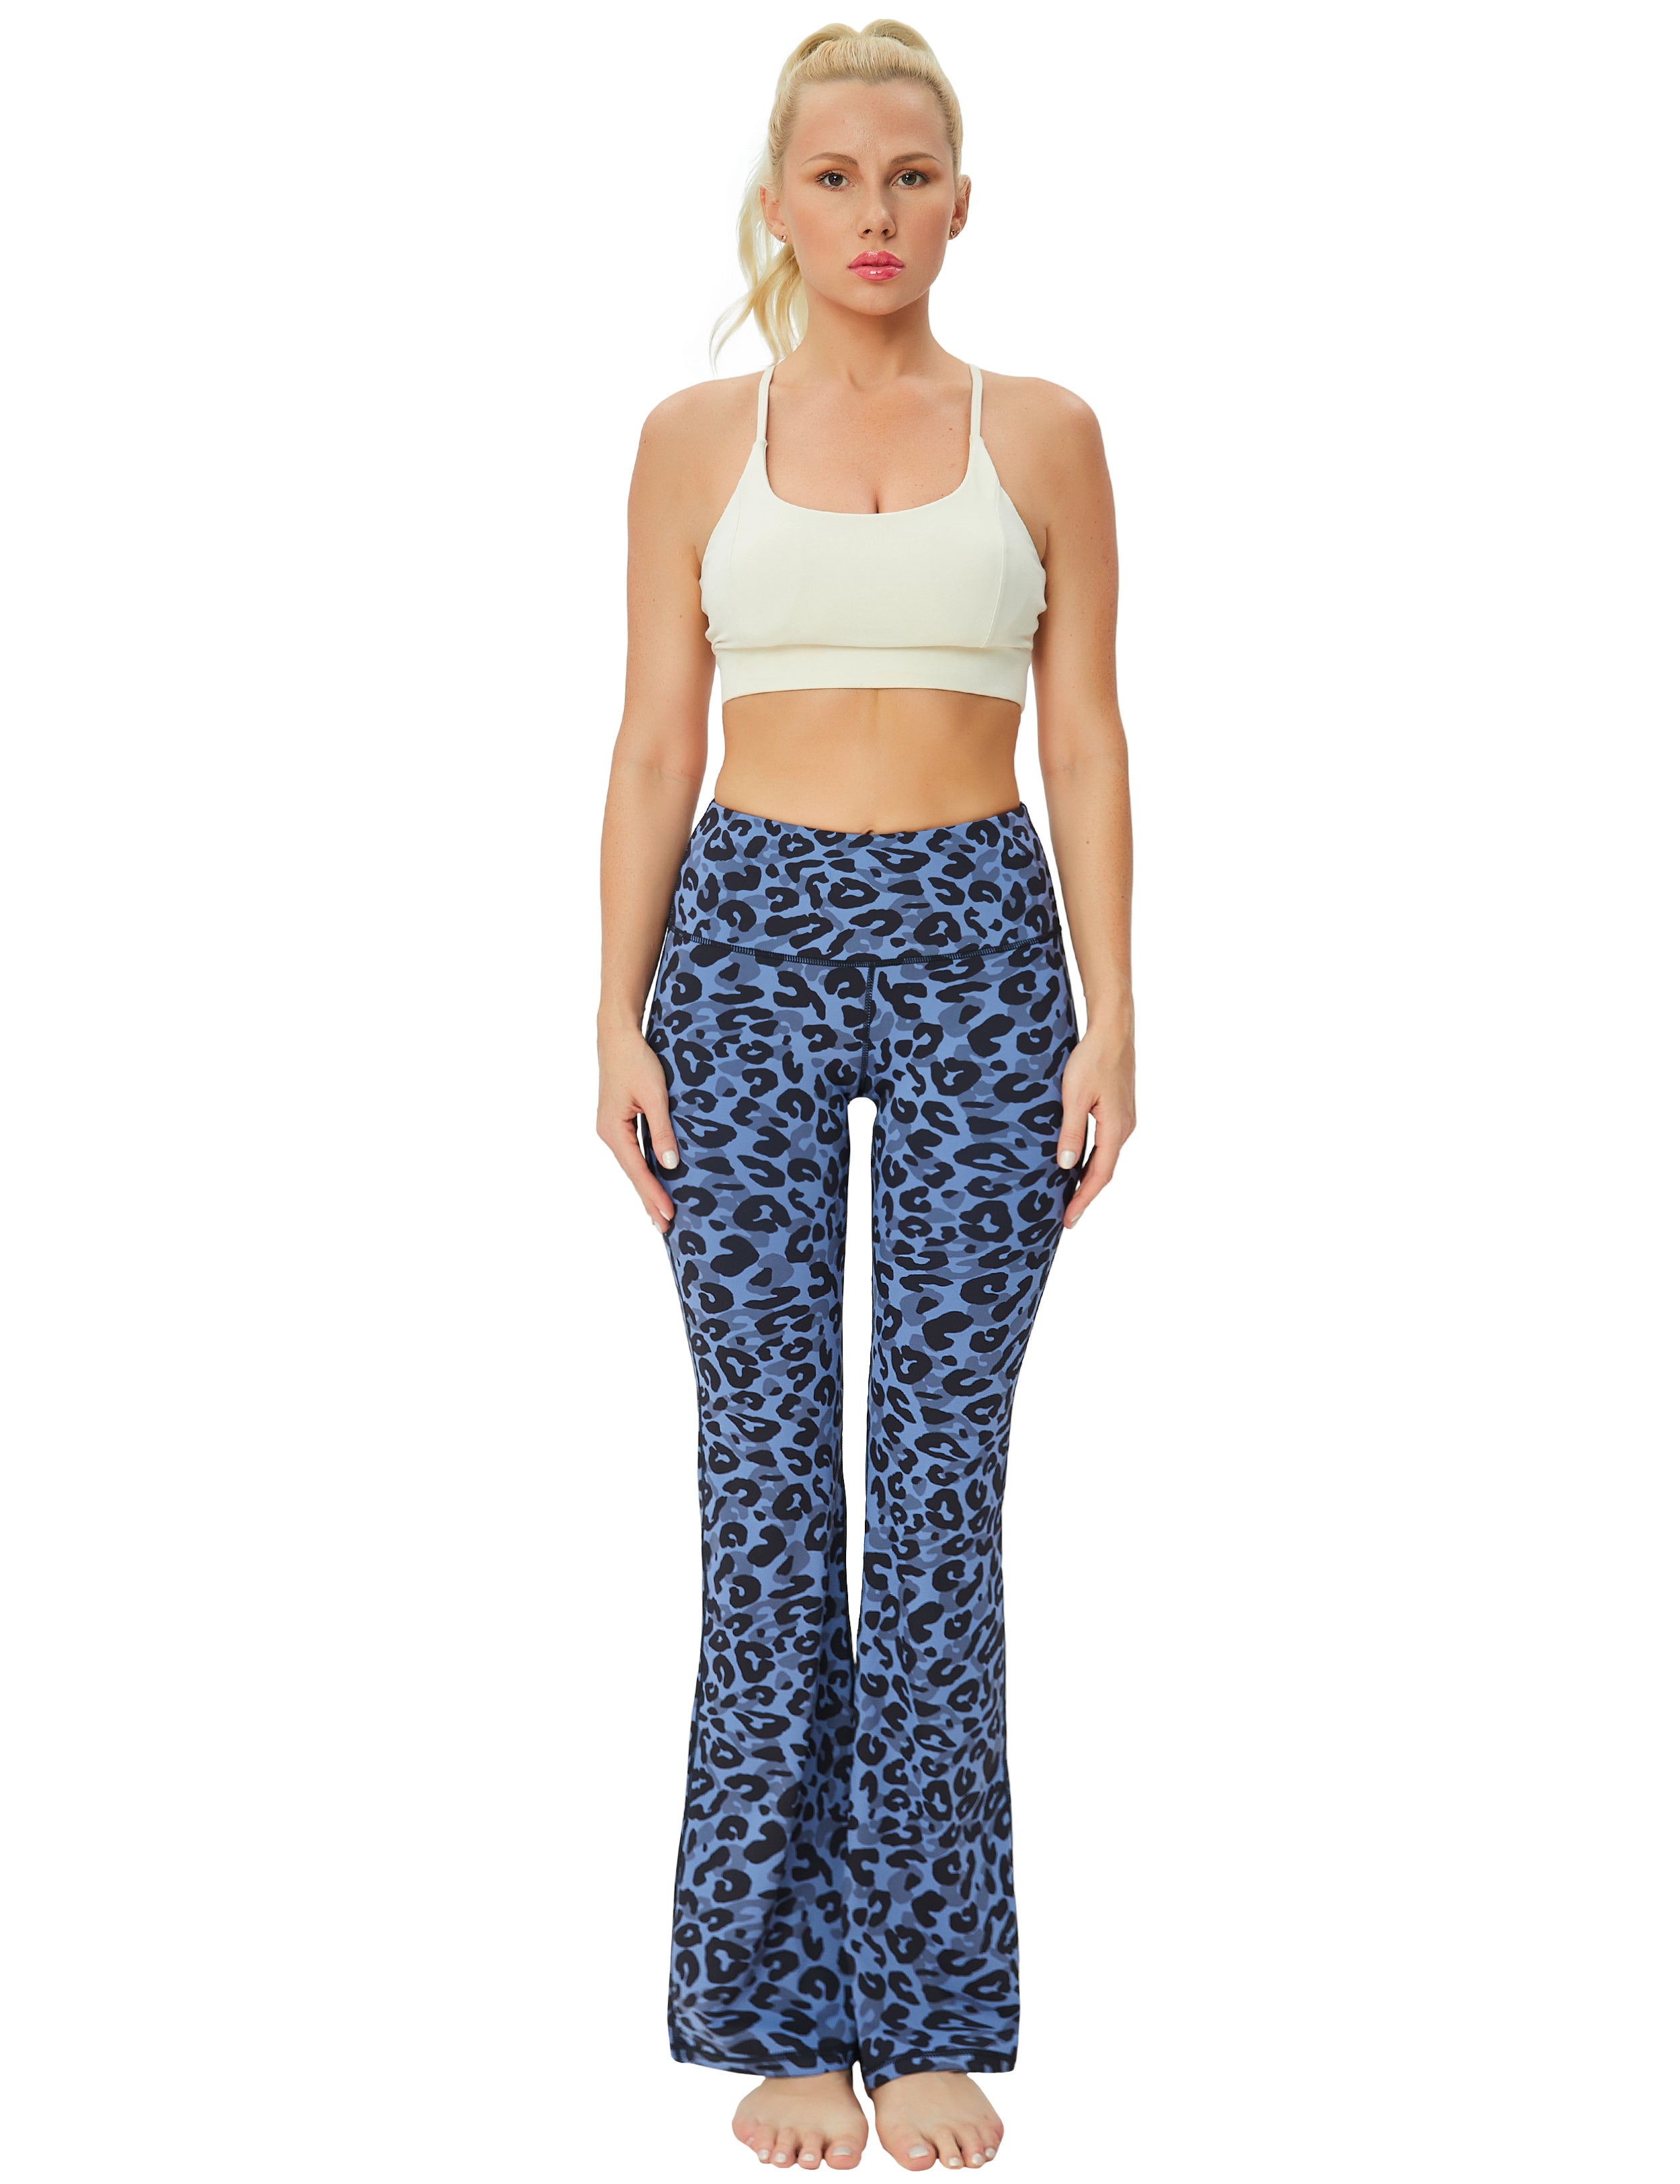 High Waist Printed Bootcut Leggings navy_leopard 78%Polyester/22%Spandex Fabric doesn't attract lint easily 4-way stretch No see-through Moisture-wicking Tummy control Inner pocket Five lengths